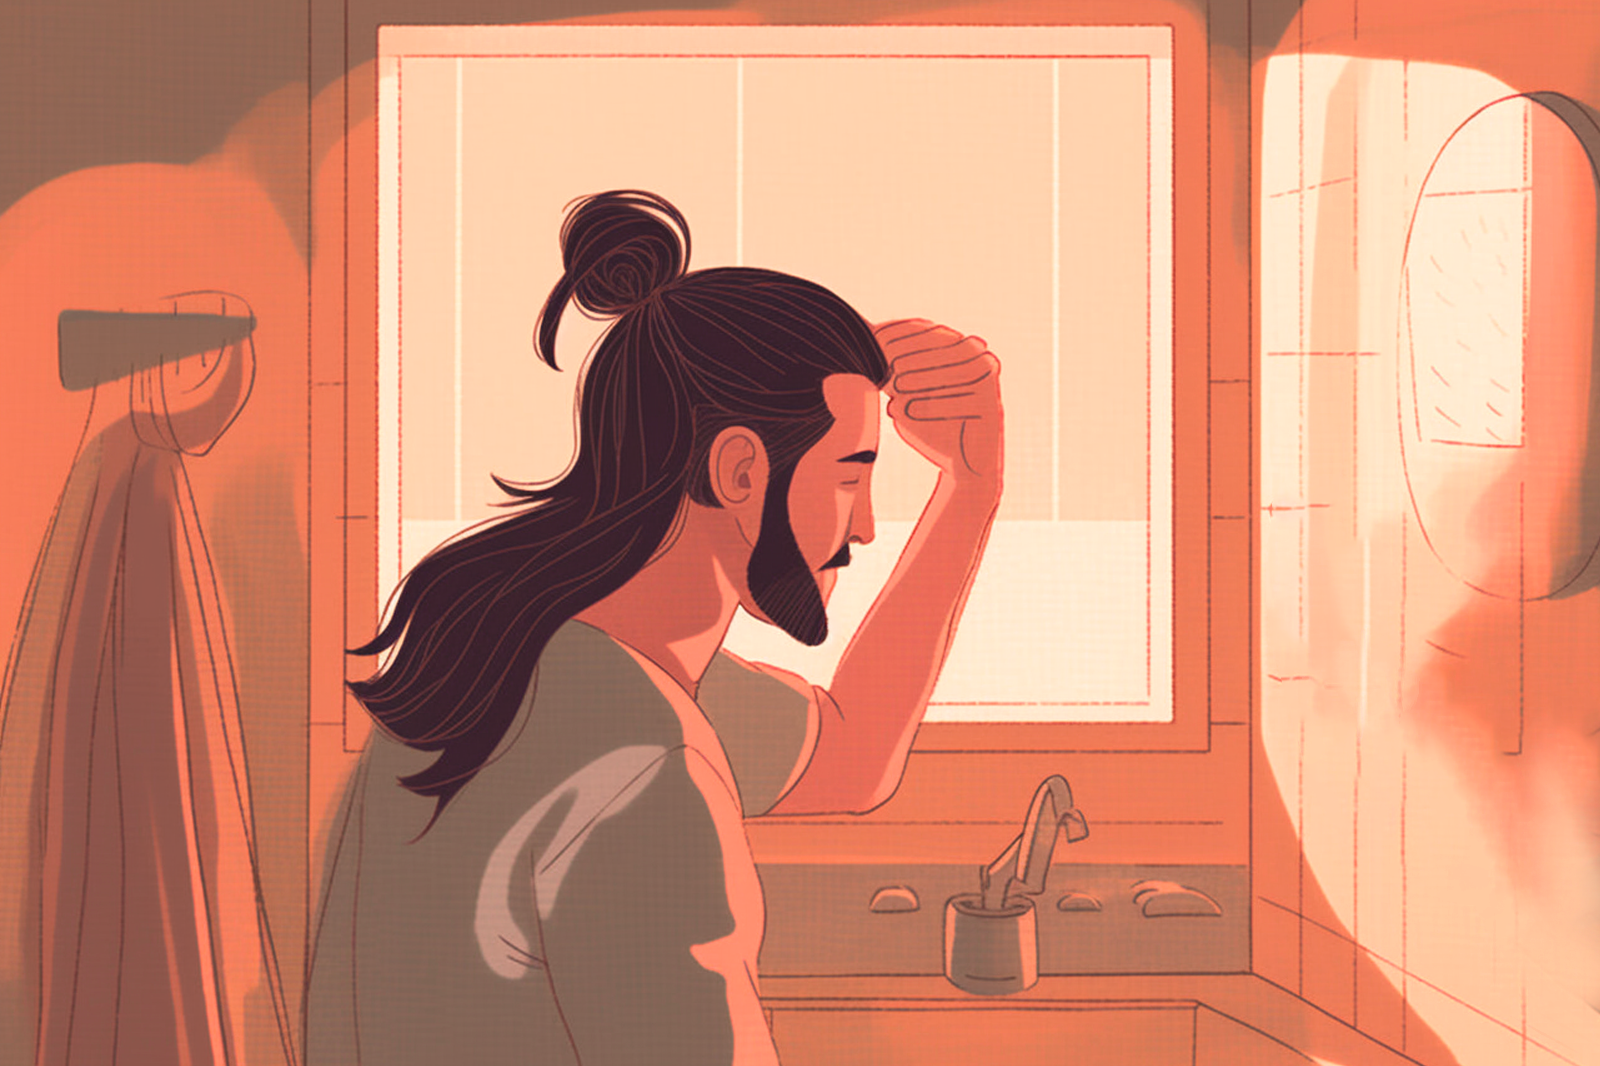 Man in bathroom, touching his rapidly growing long hair with his hand